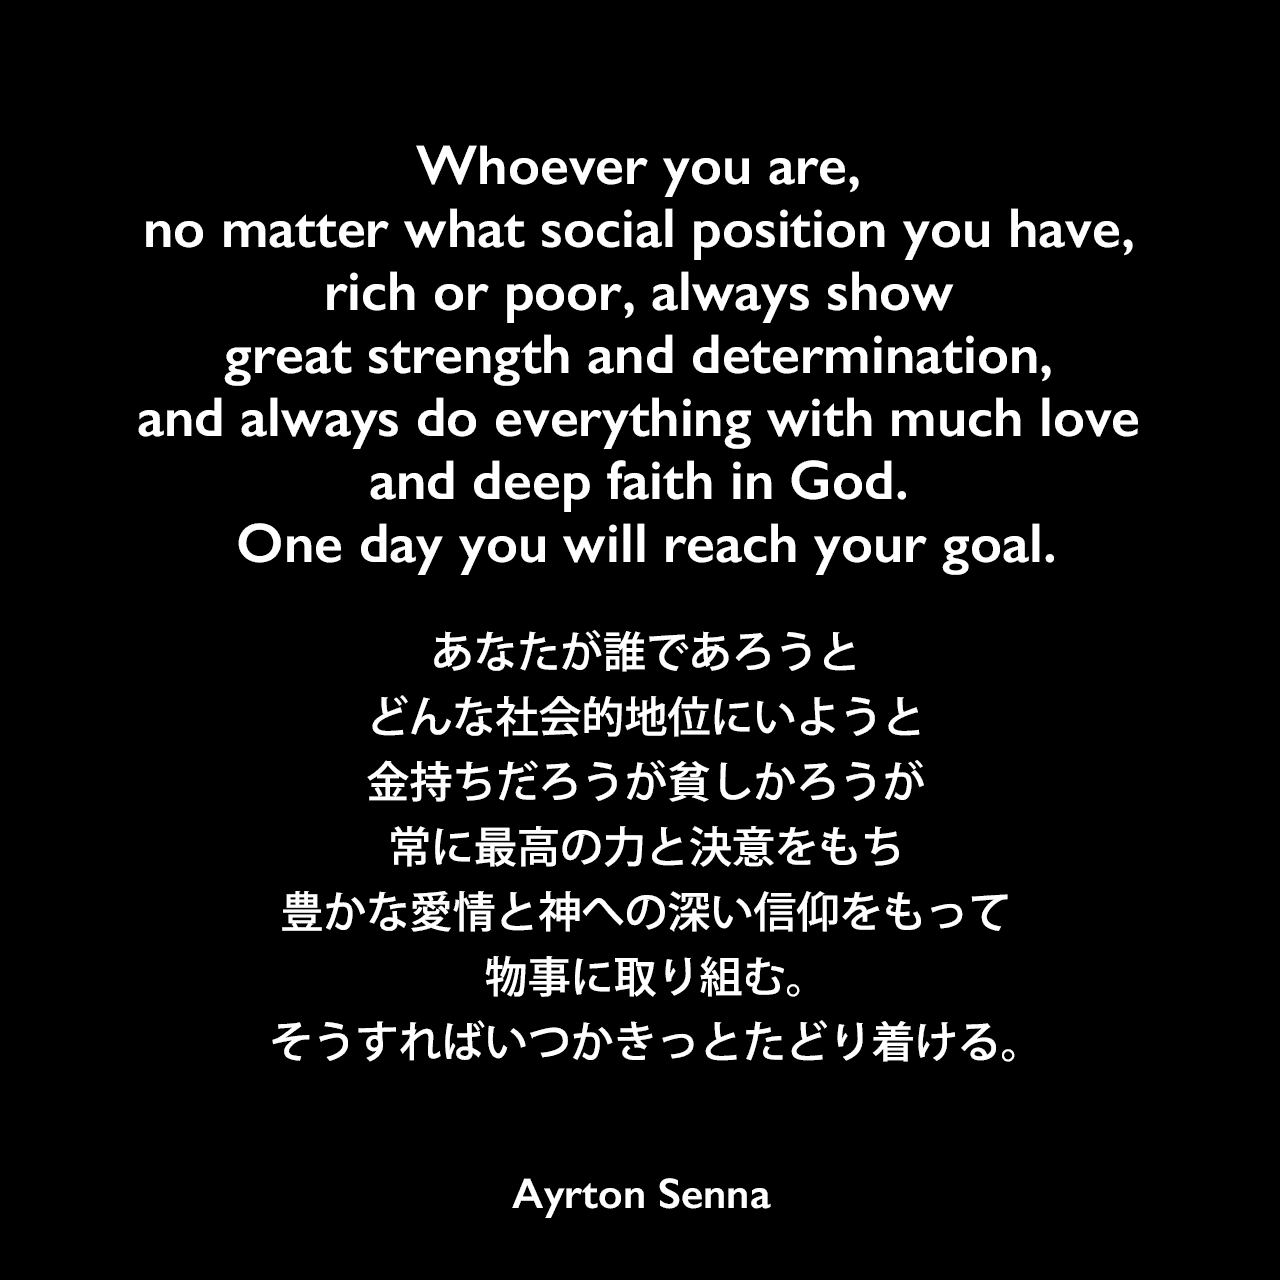 Whoever you are, no matter what social position you have, rich or poor, always show great strength and determination, and always do everything with much love and deep faith in God. One day you will reach your goal.あなたが誰であろうと、どんな社会的地位にいようと、金持ちだろうが貧しかろうが、常に最高の力と決意をもち、豊かな愛情と神への深い信仰をもって物事に取り組む。そうすればいつかきっとたどり着ける。Ayrton Senna